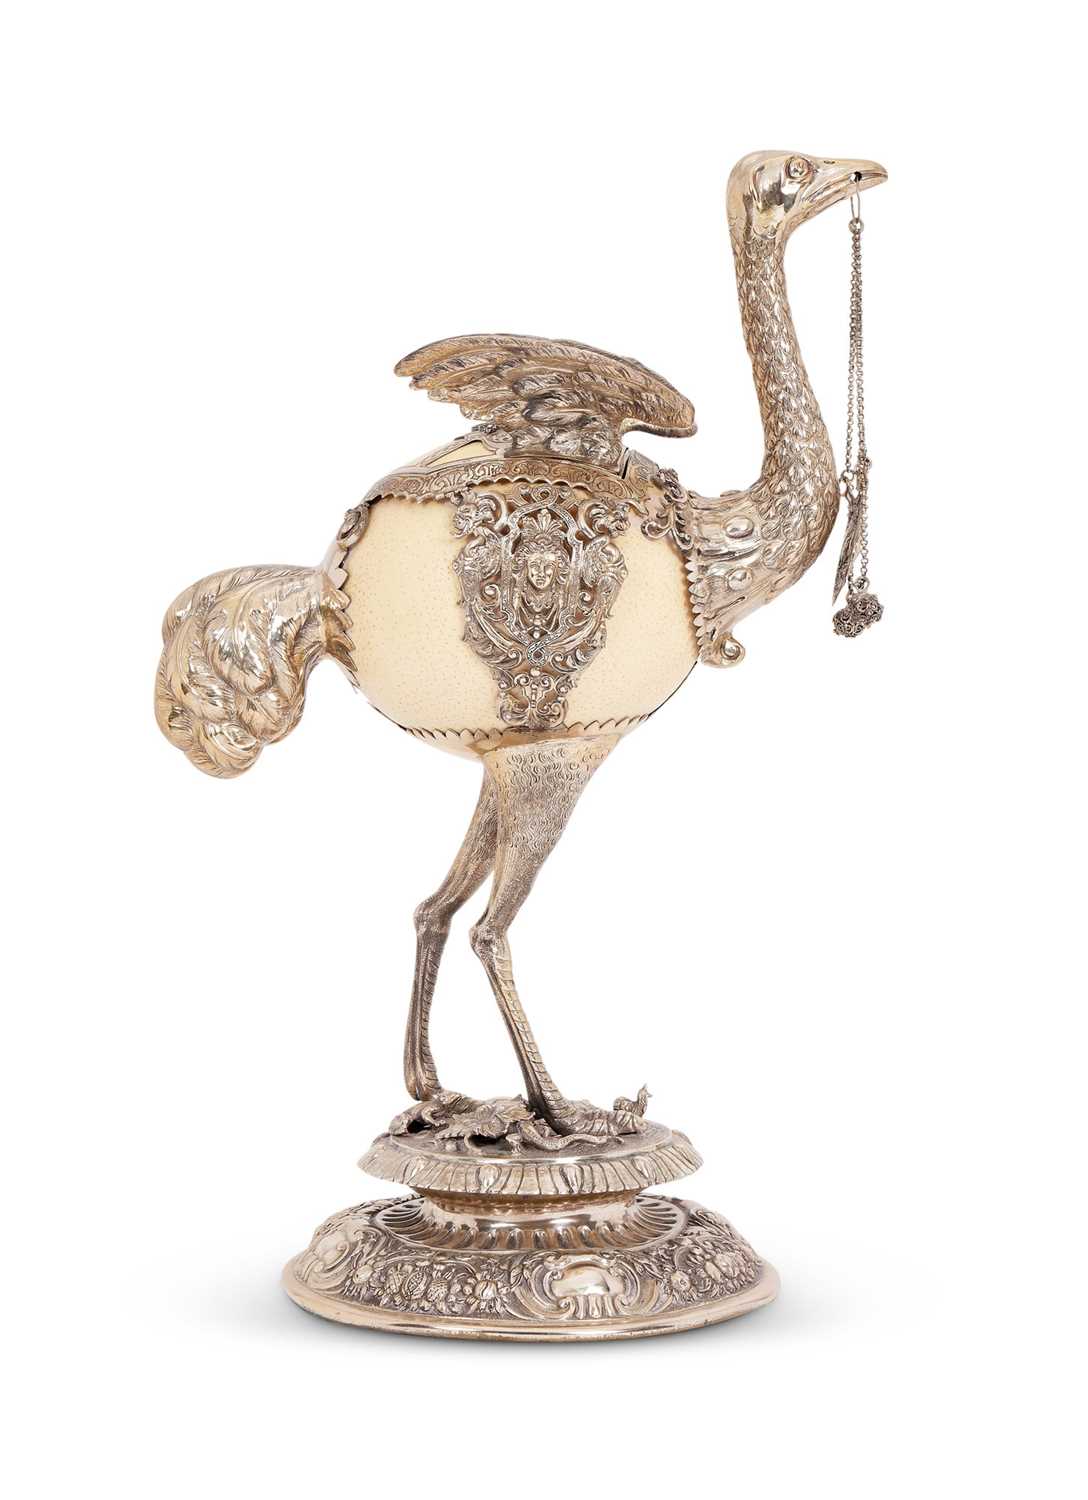 A LATE 19TH CENTURY SILVER MOUNTED OSTRICH EGG CUP AND COVER, PROBABLY HANAU - Image 3 of 5